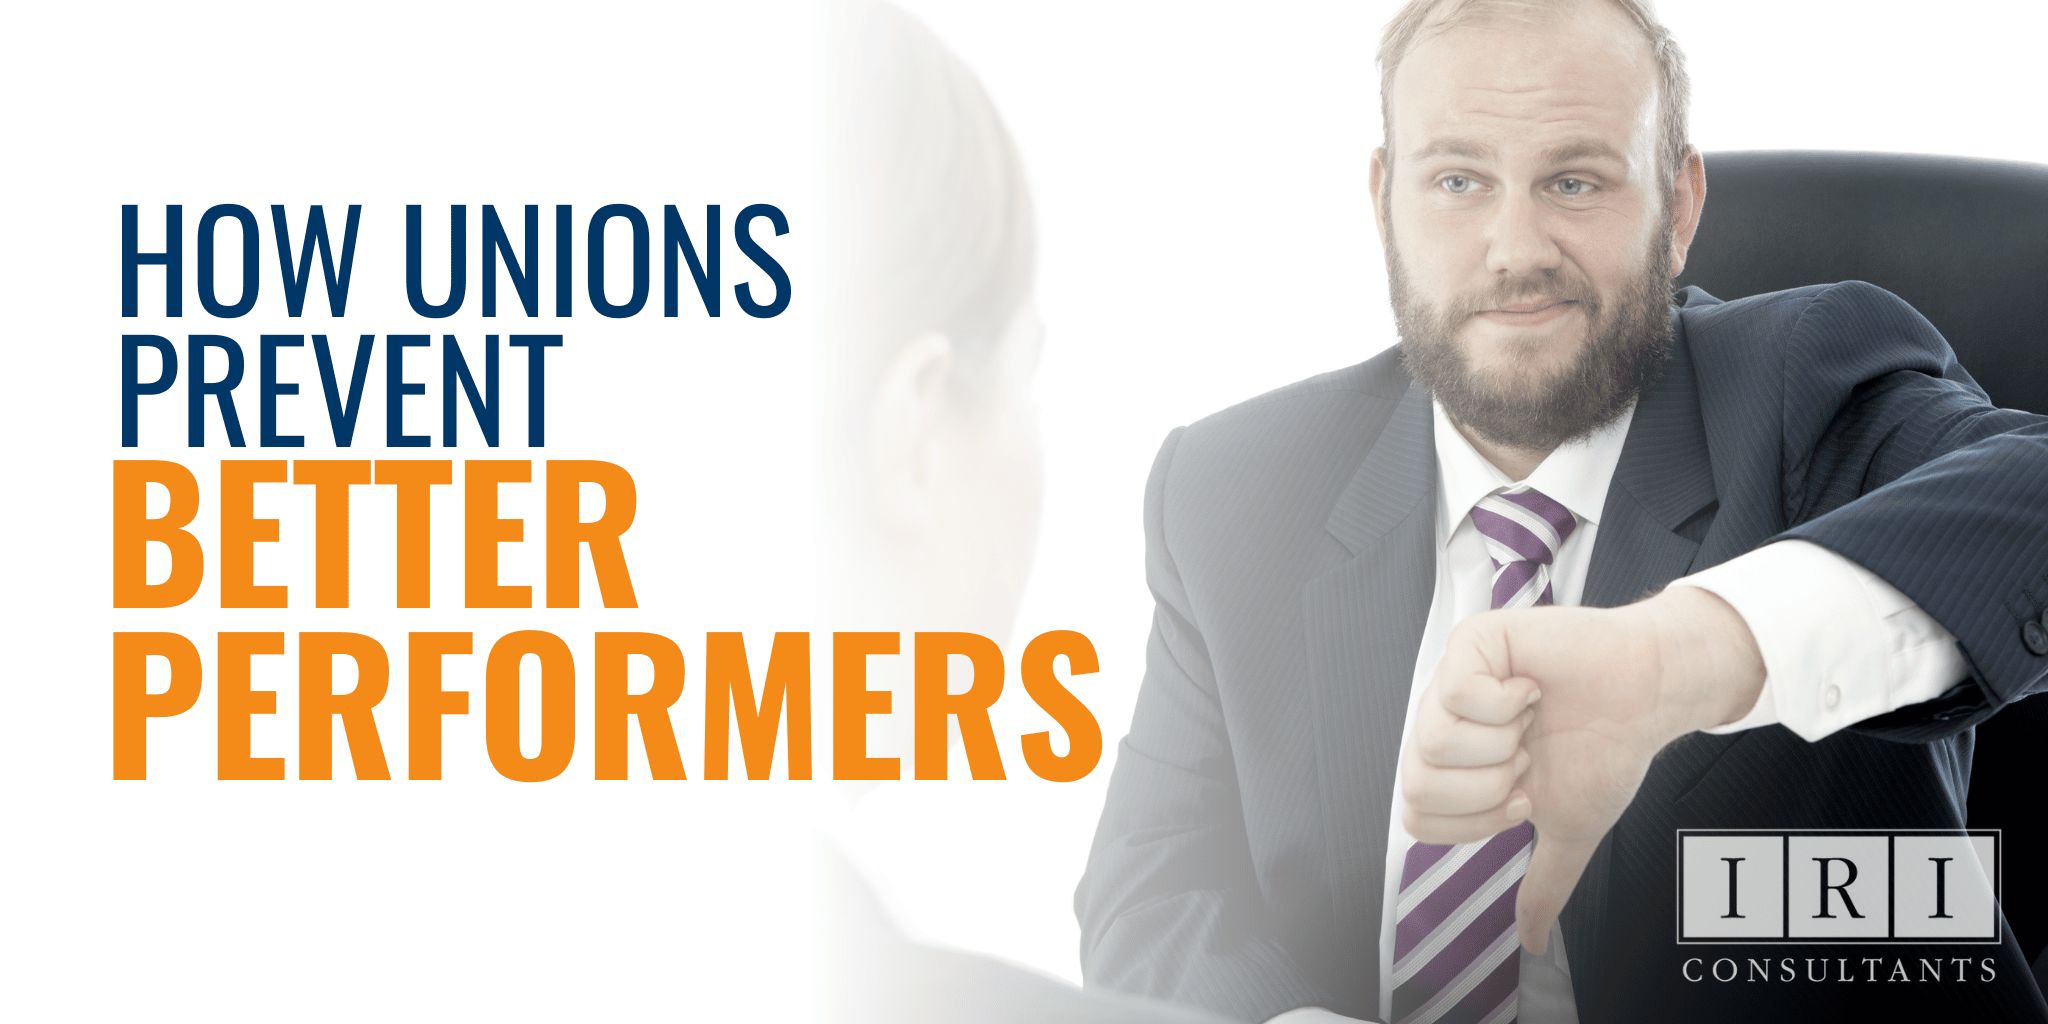 unions can prevent better performers